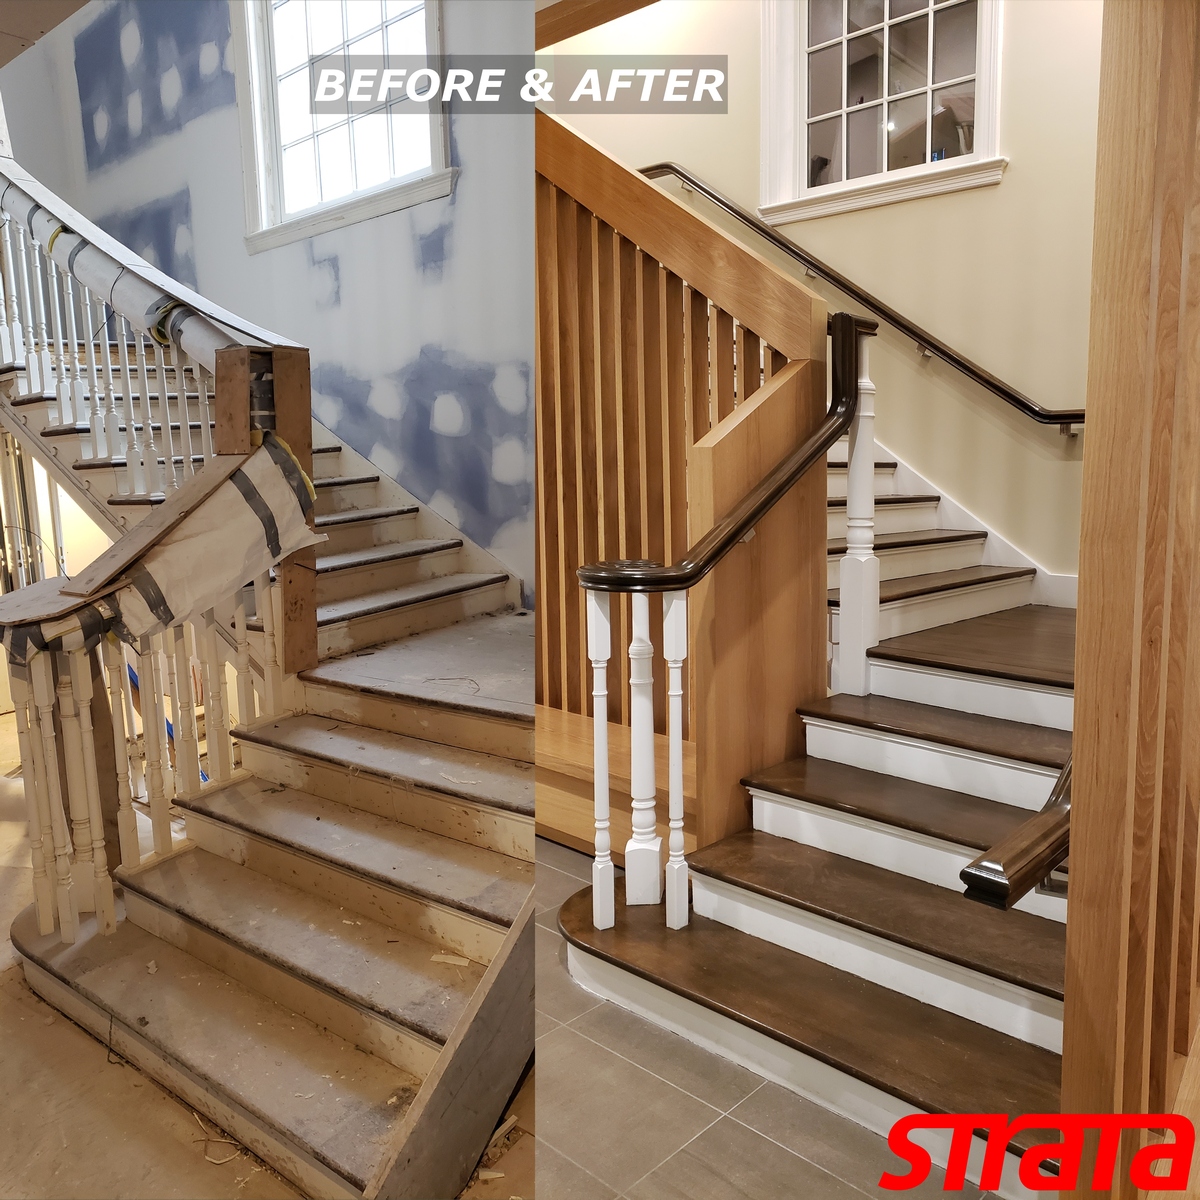 Before and After - Historical Building Heritage Property - Dust Free Stair Refinishing - Railing Renovation - Toronto, Vaughan, Downtown Toronto, Downtown, North York